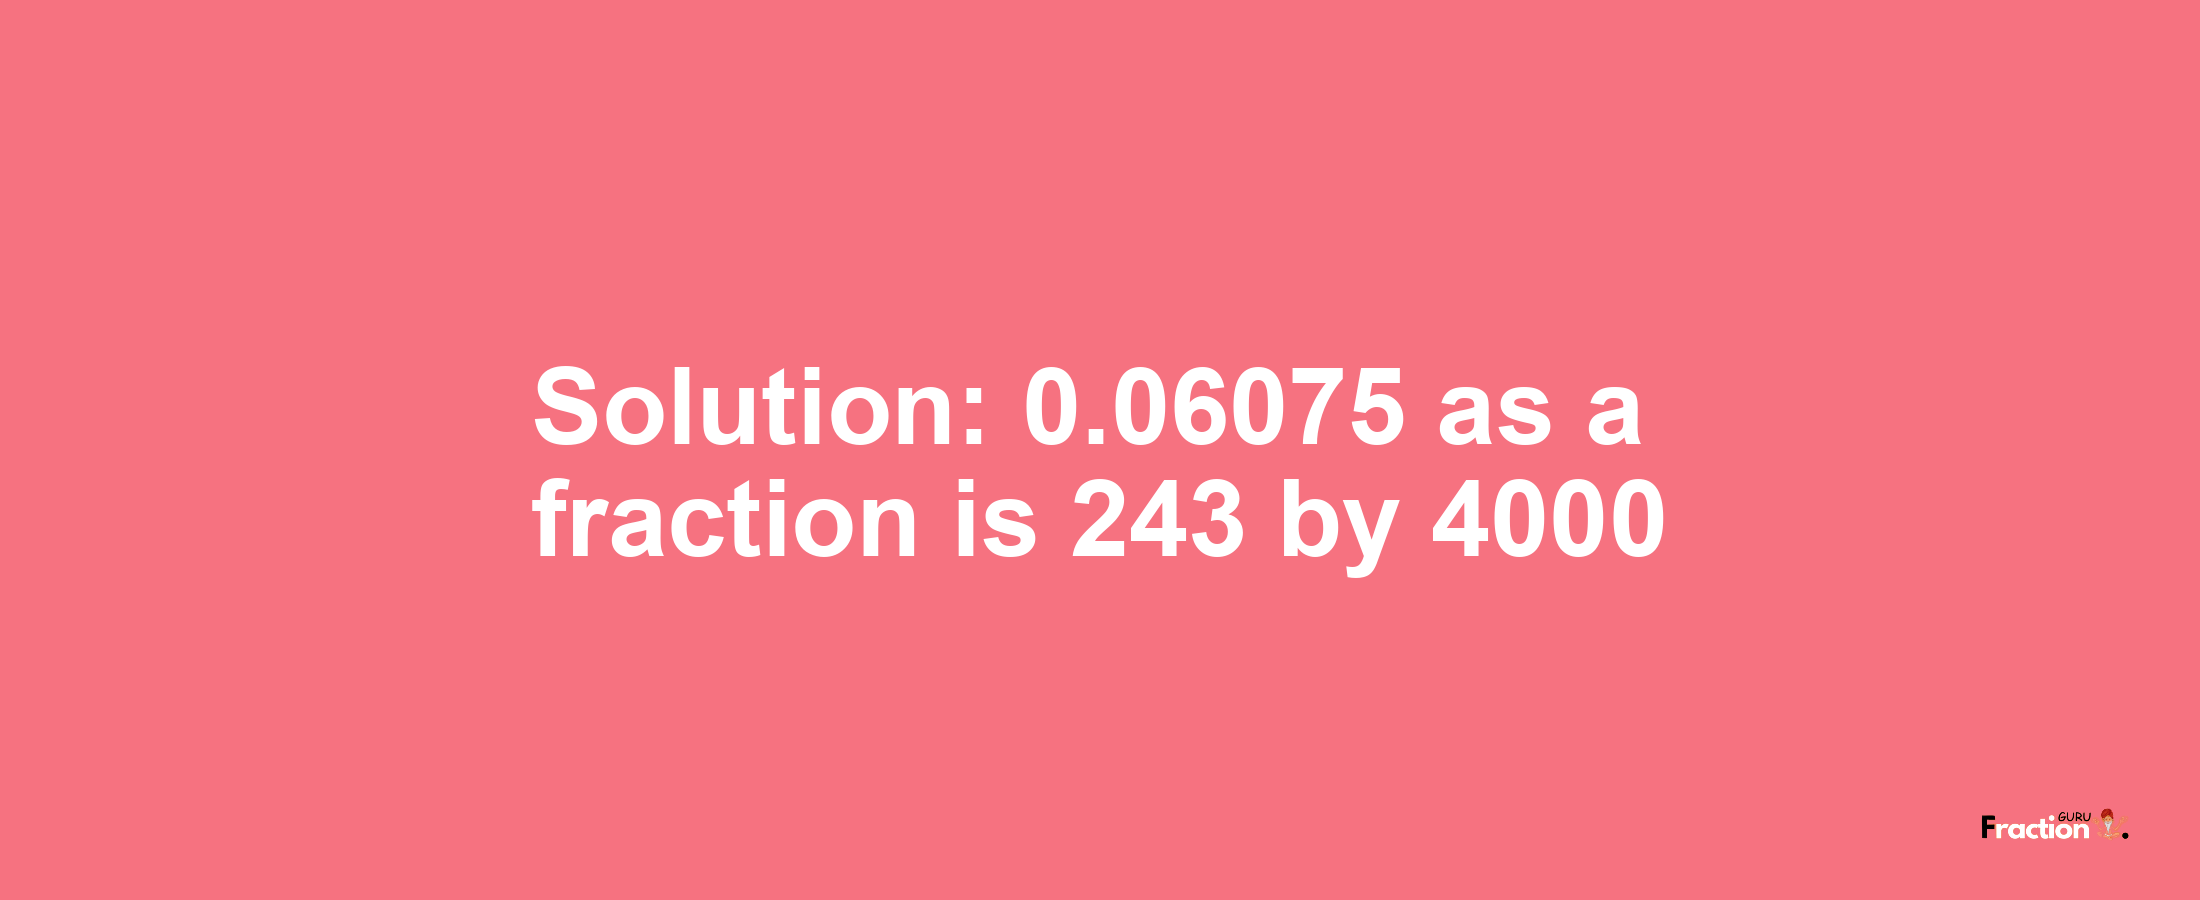 Solution:0.06075 as a fraction is 243/4000